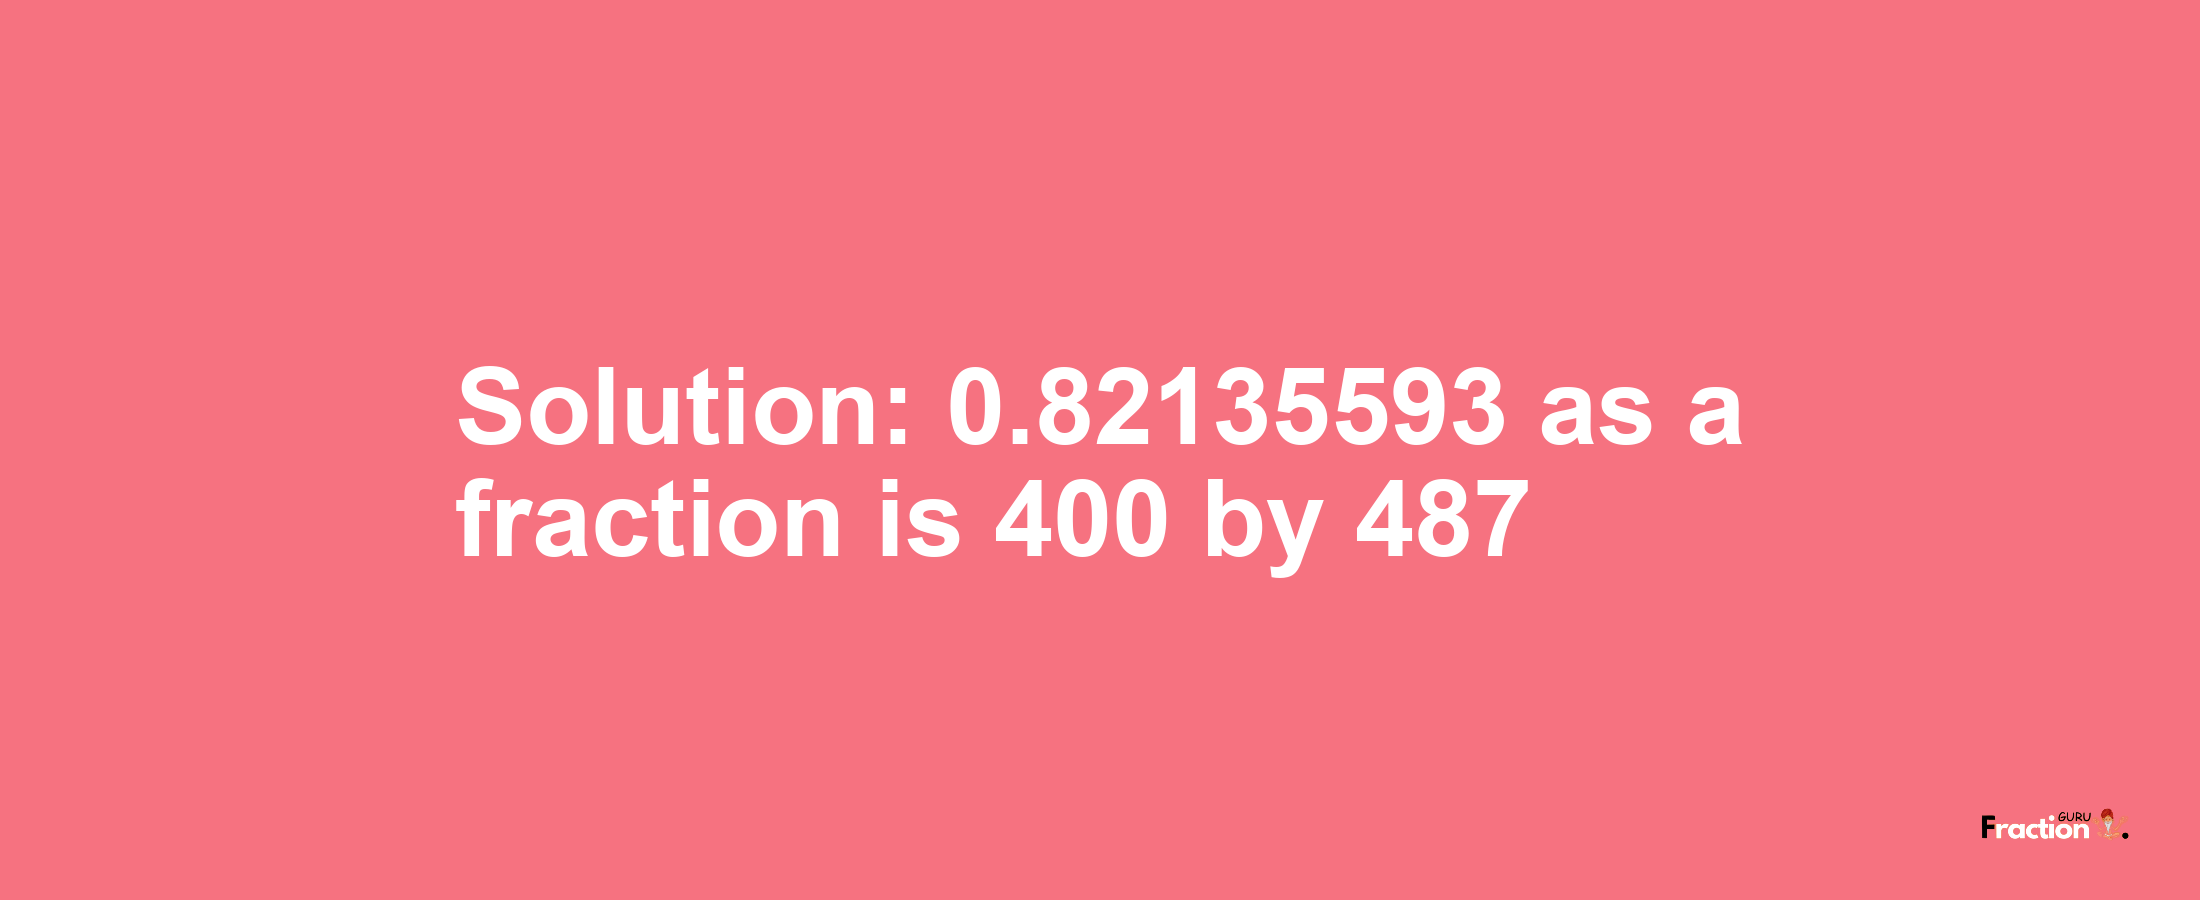 Solution:0.82135593 as a fraction is 400/487